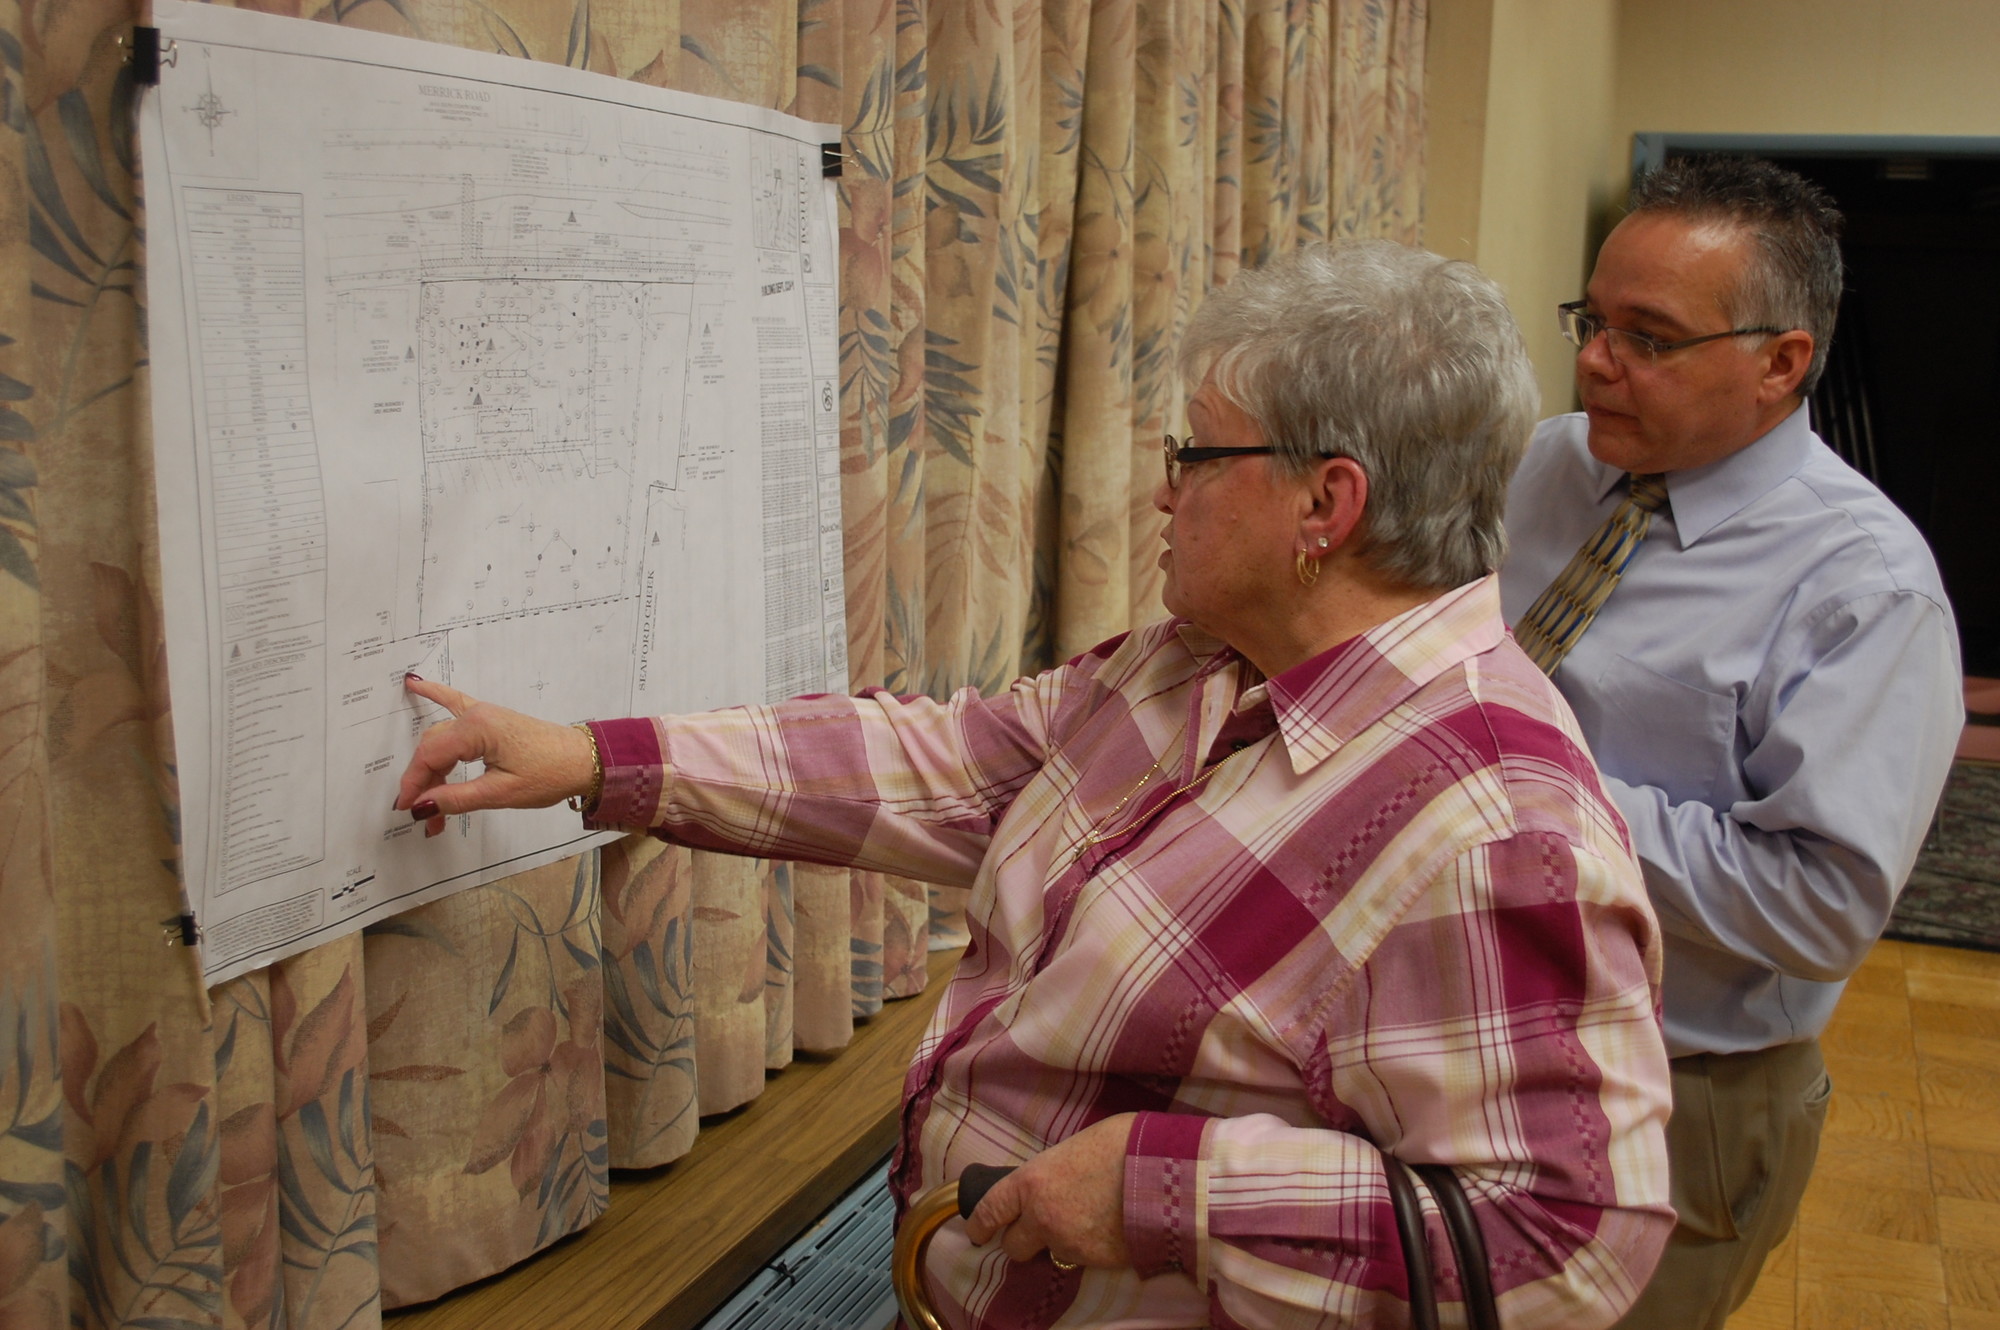 Carla Powell and Paul Franco reviewed plans for the project.